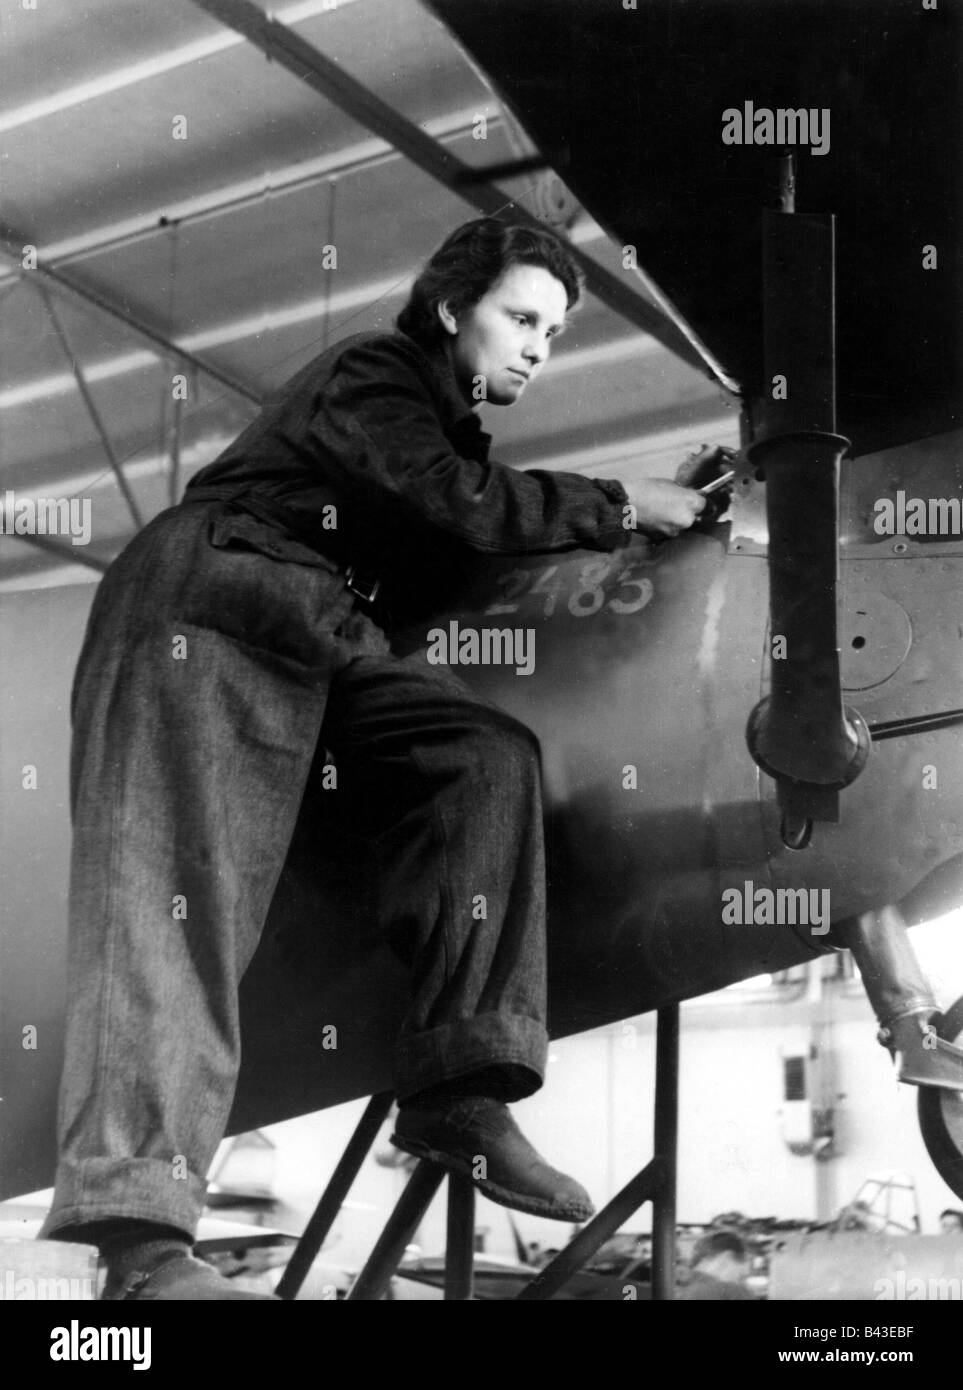 events, Second World War / WWII, Germany, armaments industry, aircraft assembly, female worker at the empennage of a Messerschmitt Bf 109 E, circa 1940, Stock Photo